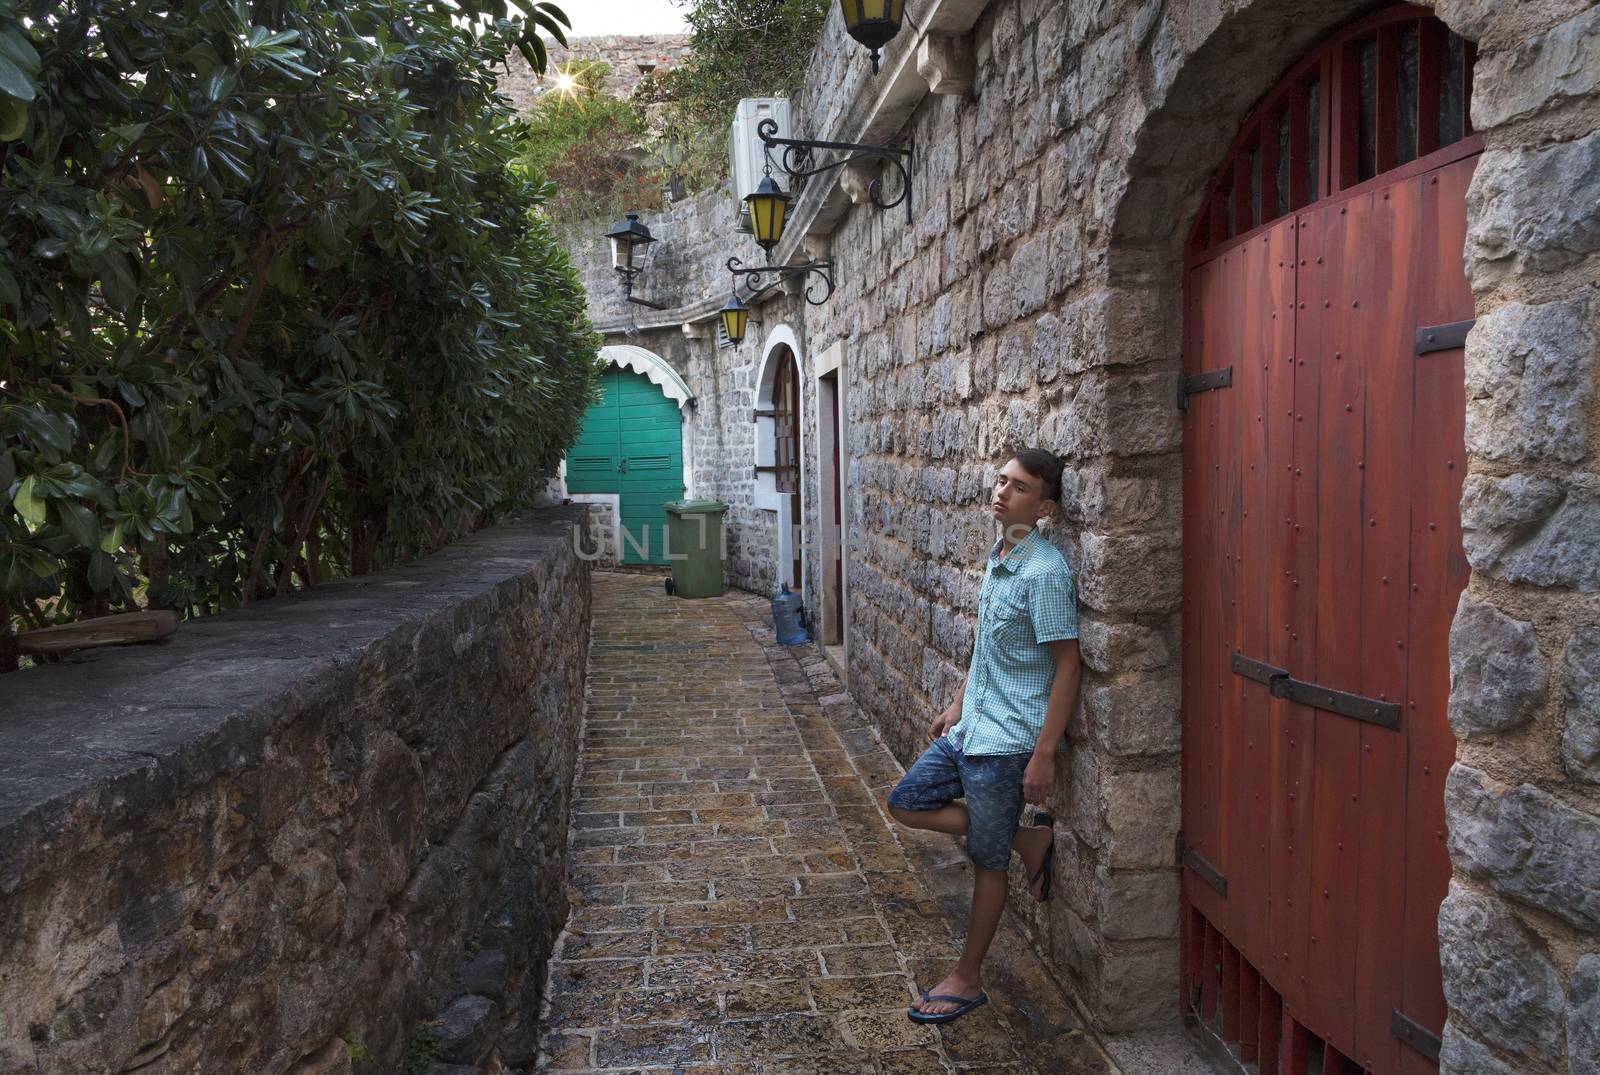 The young man stands near the wooden gate in the narrow street of the old town of Budva, Montenegro. by Sergii